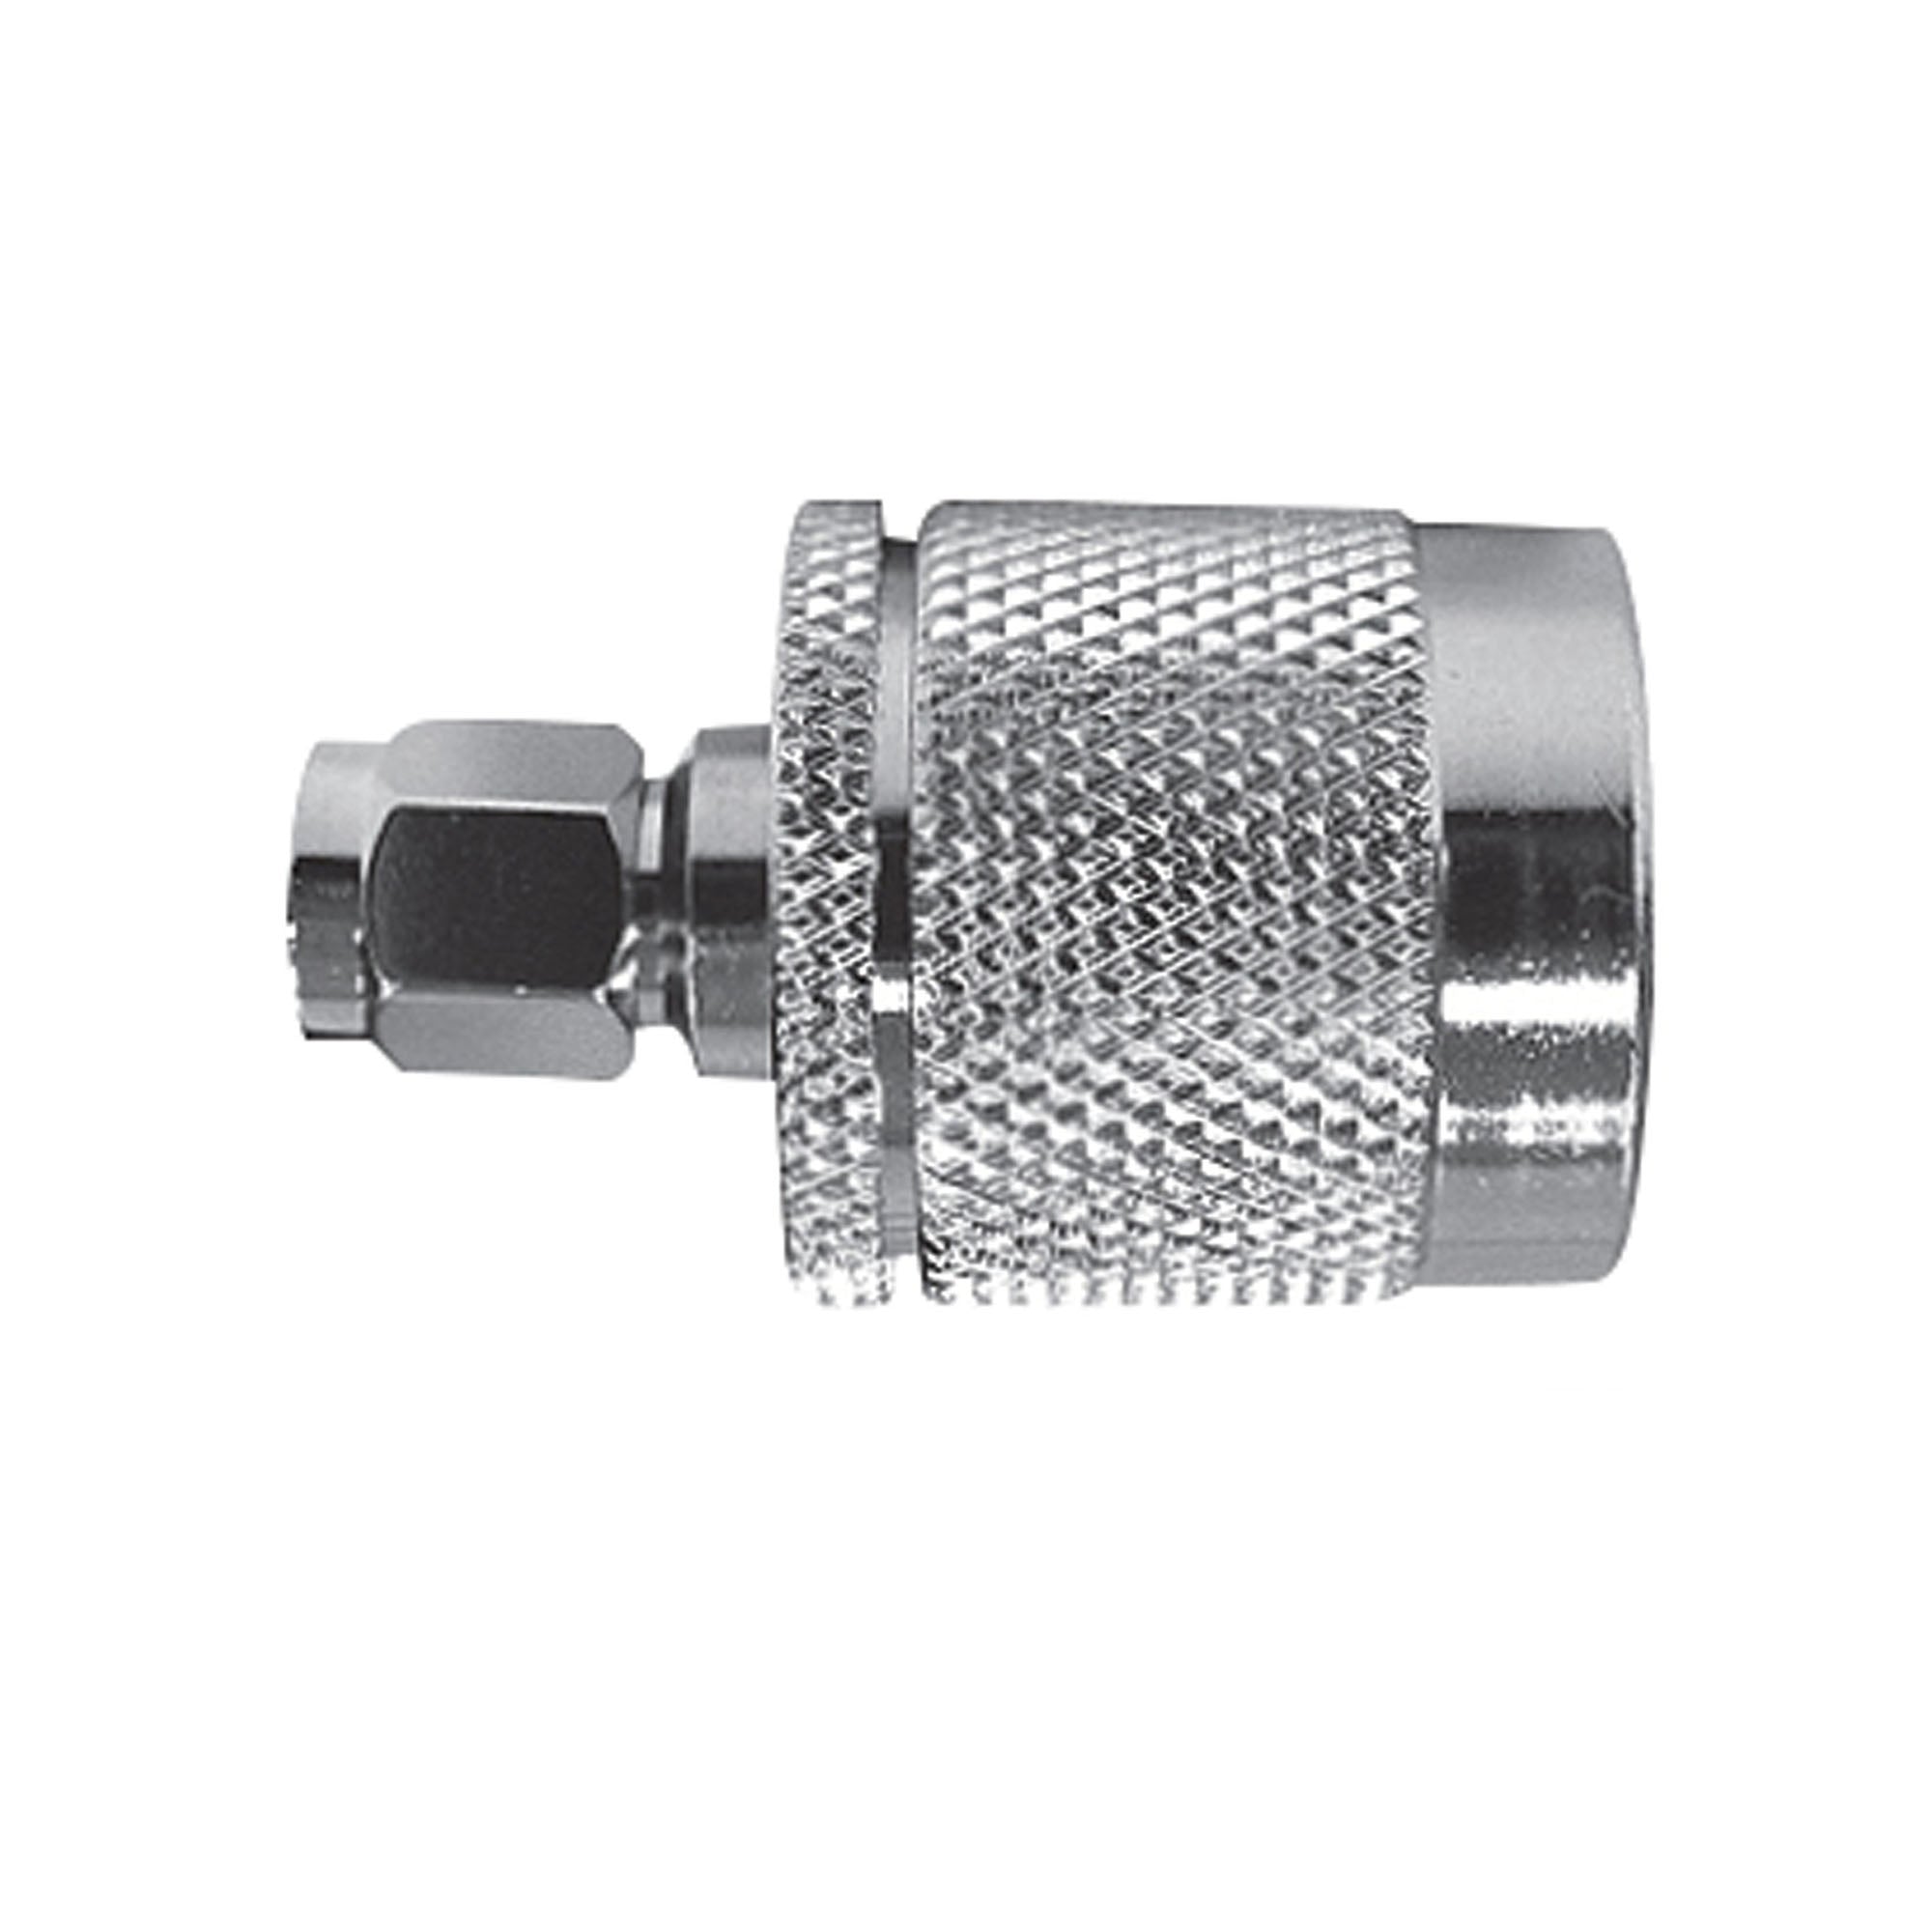 Wilson SMA Male to N Male Connector - 670WI971132